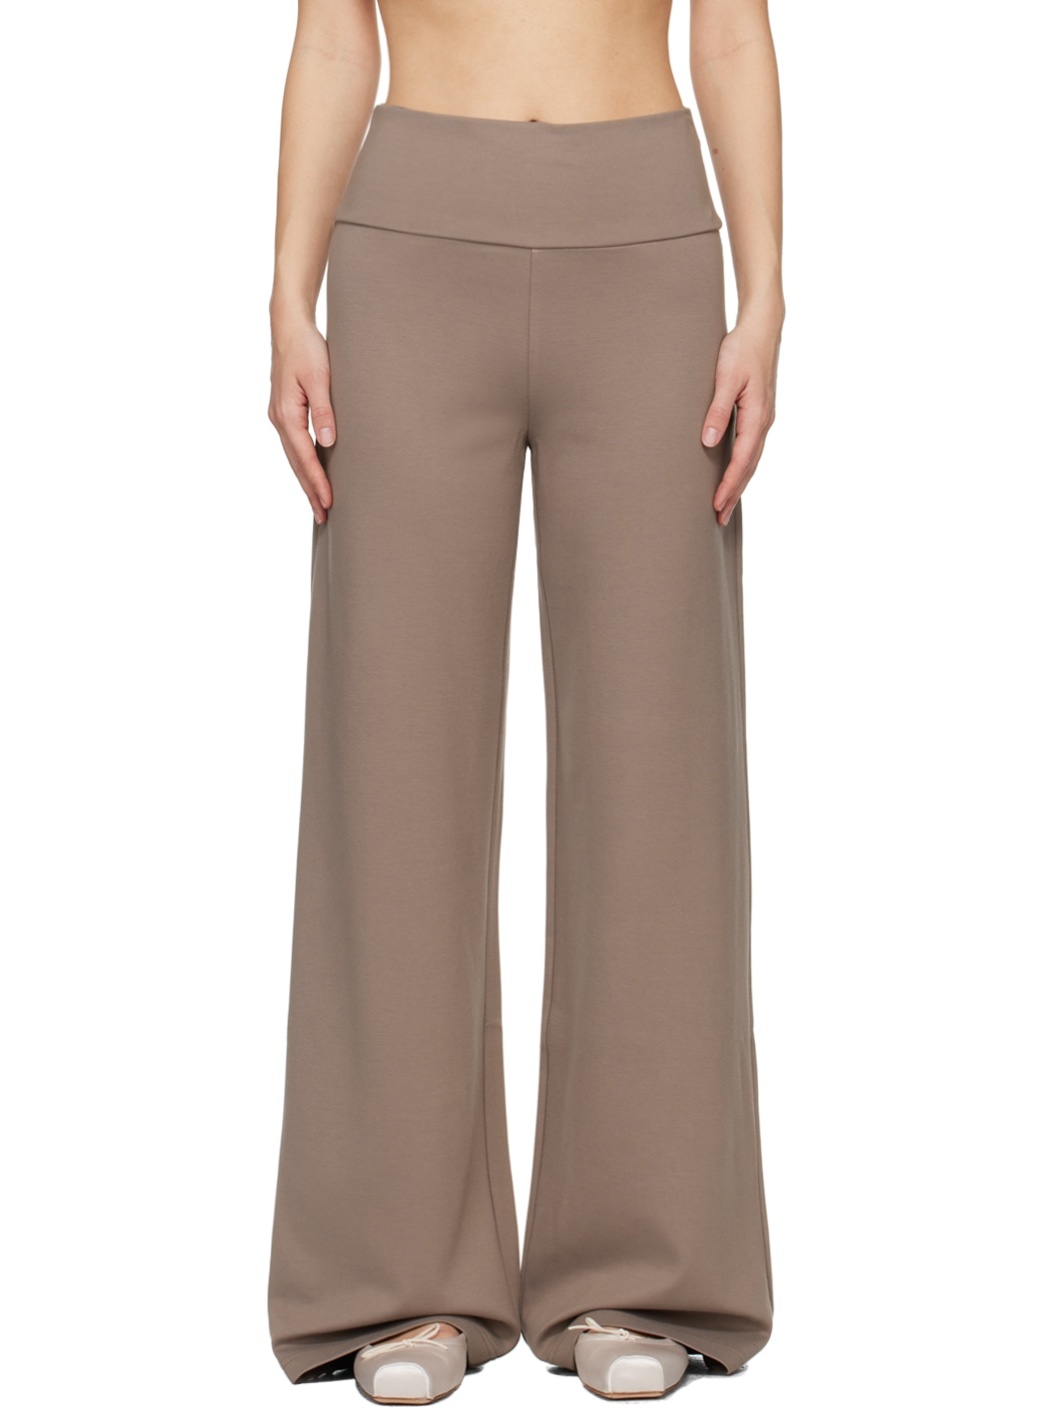 SSENSE Exclusive Taupe 'Elemental by Paris Georgia' Everyday Lounge Pants - 1